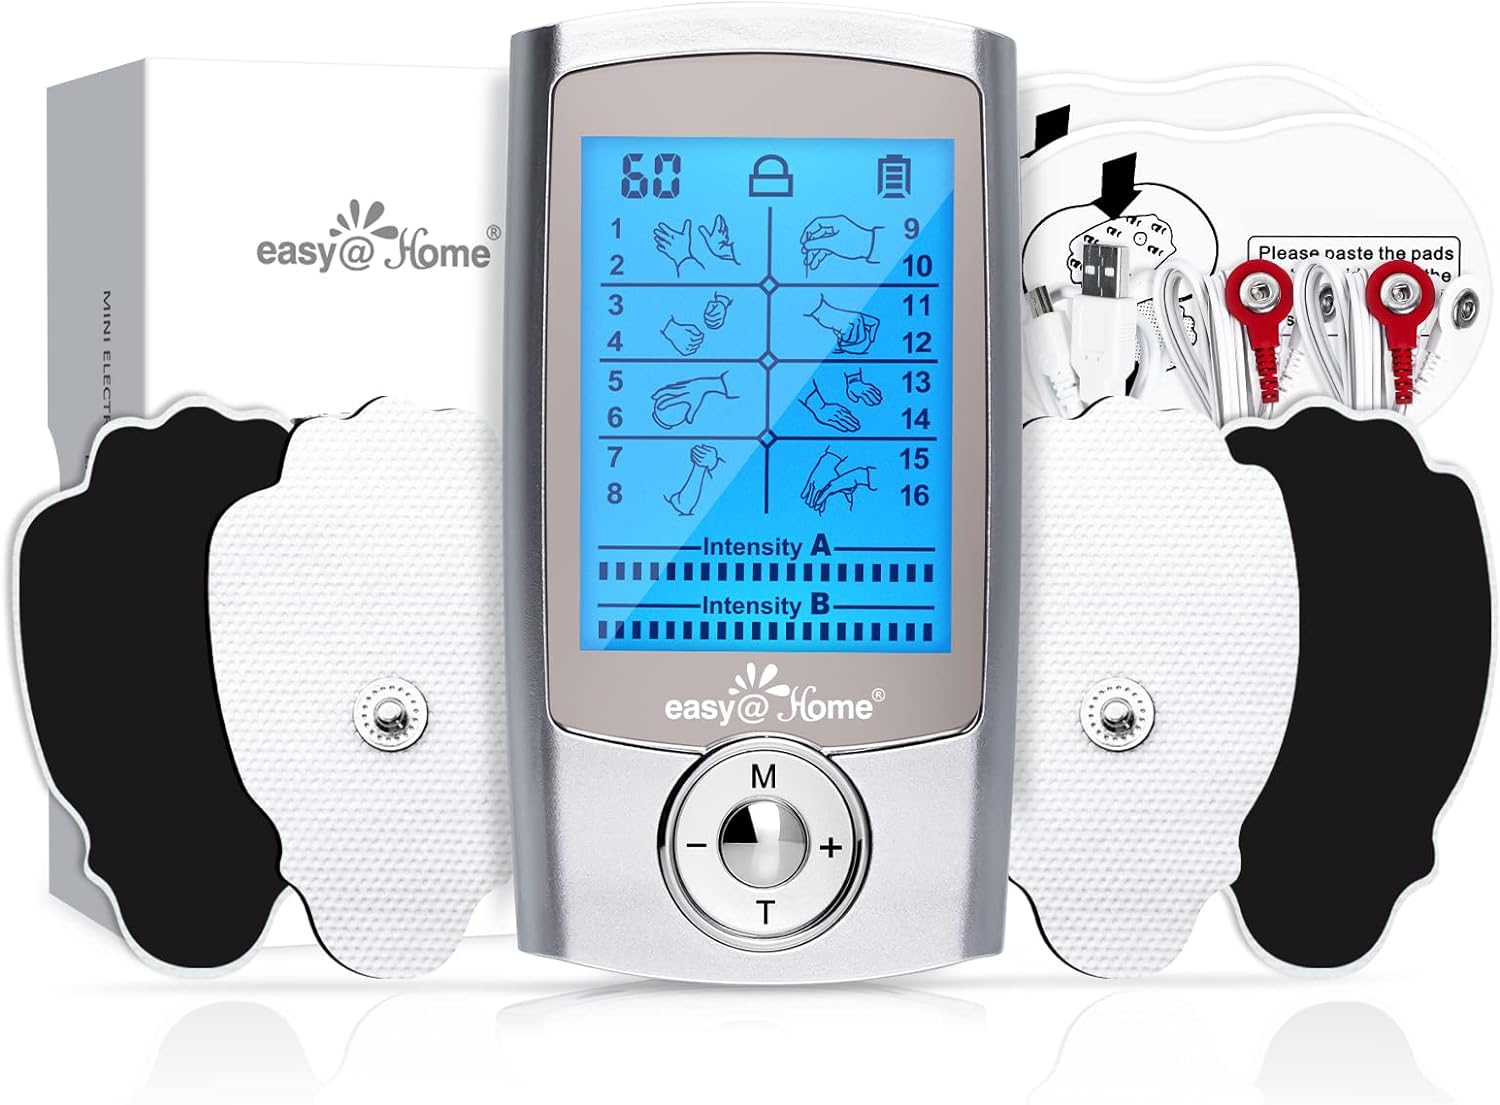 Mini Electronic Pulse Stimulator - Easy@Home TENS Unit Muscle Massager - 510K Cleared for OTC Use Handheld Pain Relief Therapy Device ? Pain Management on The Shoulder, Joint, Back, Leg&More (EHE029N)